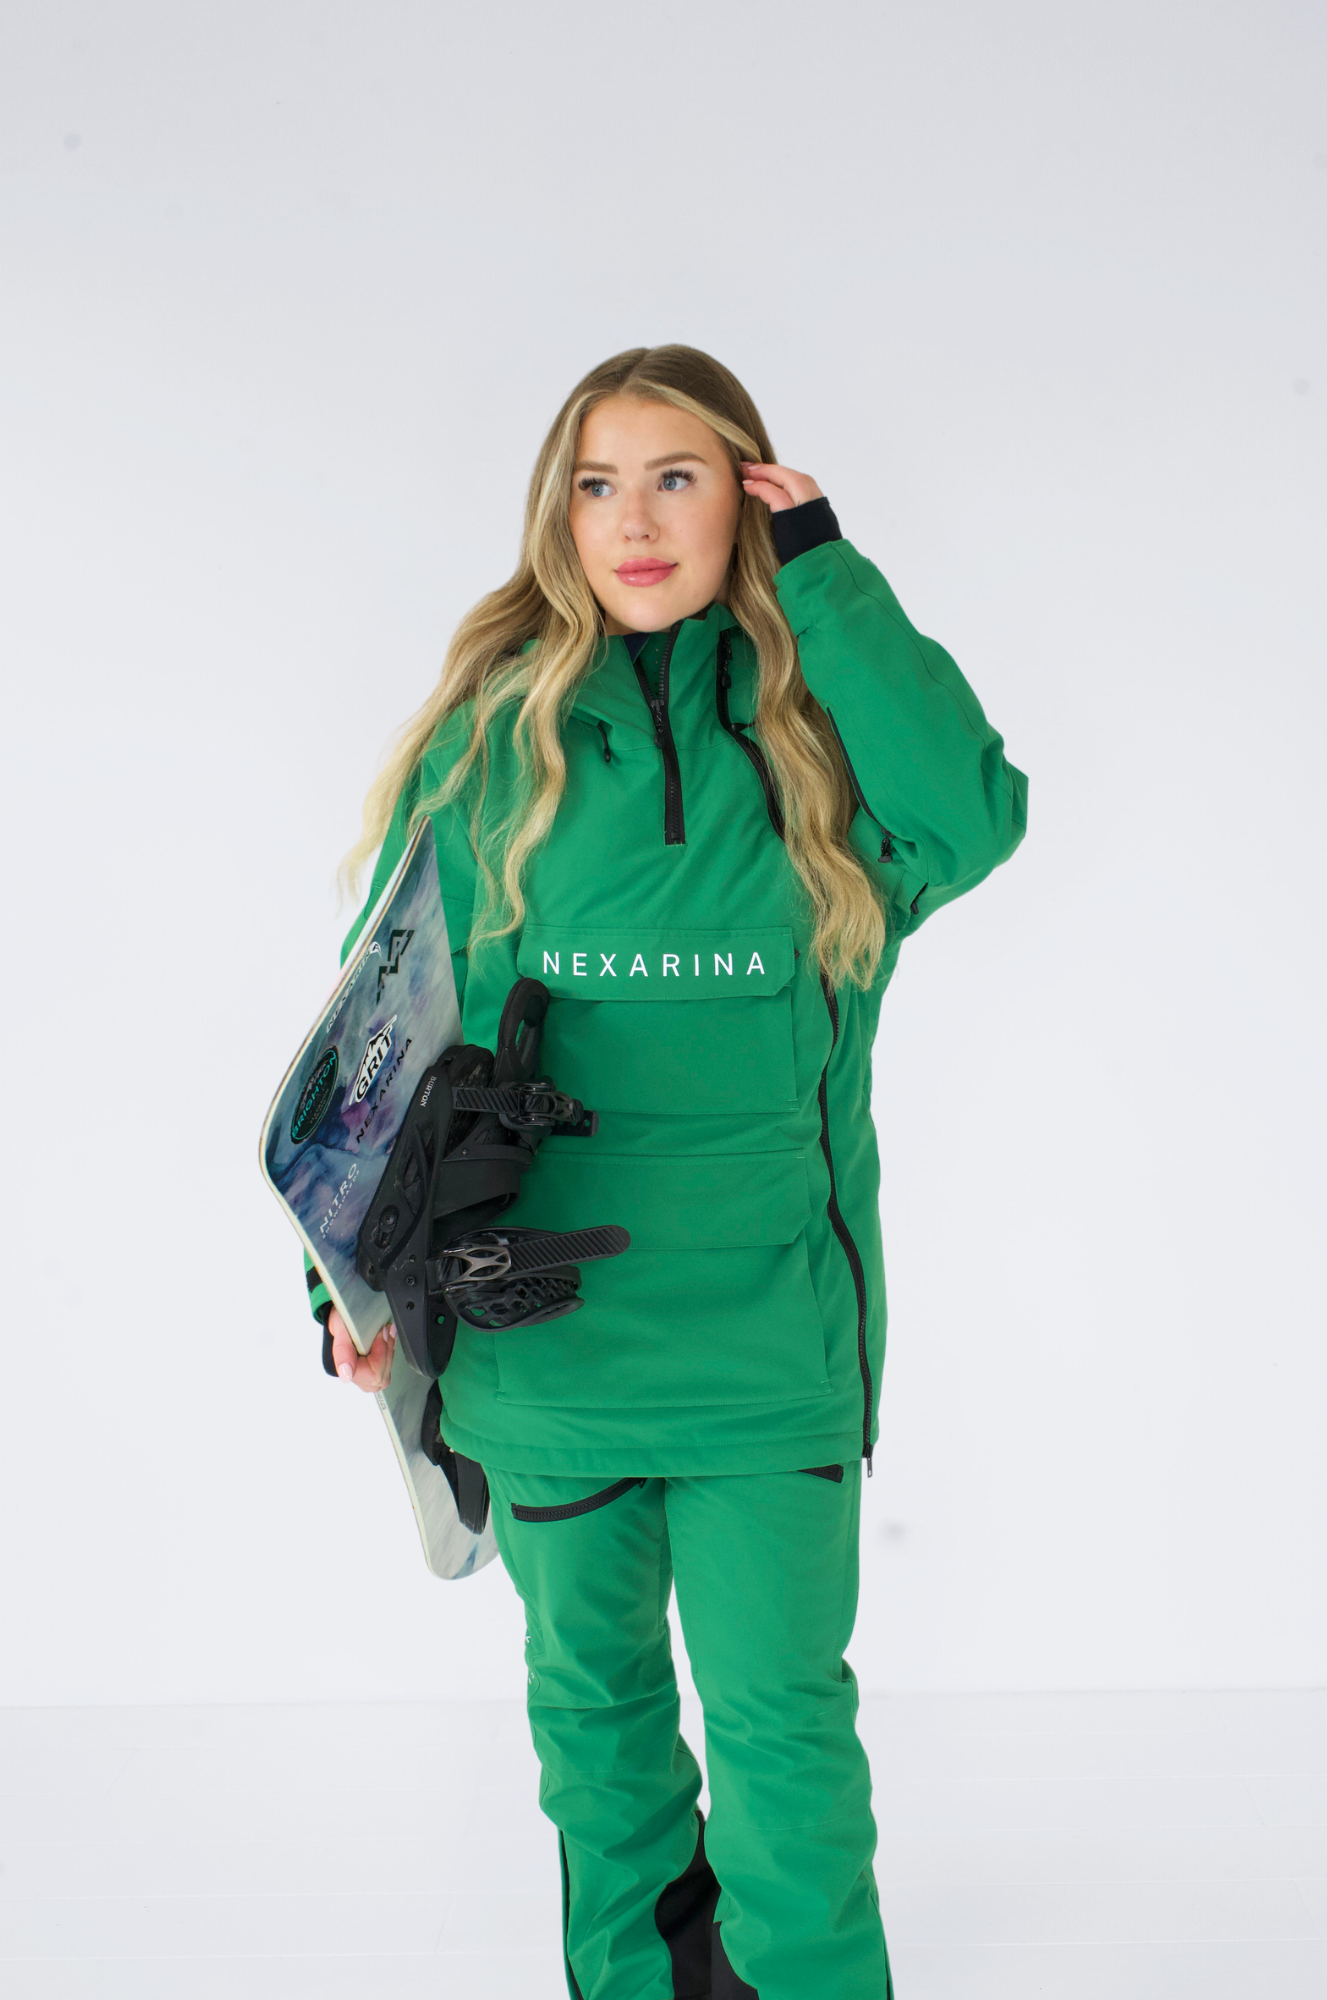 Model wearing a green Nexarina Indy snow jacket and holding a snowboard, ready for action.